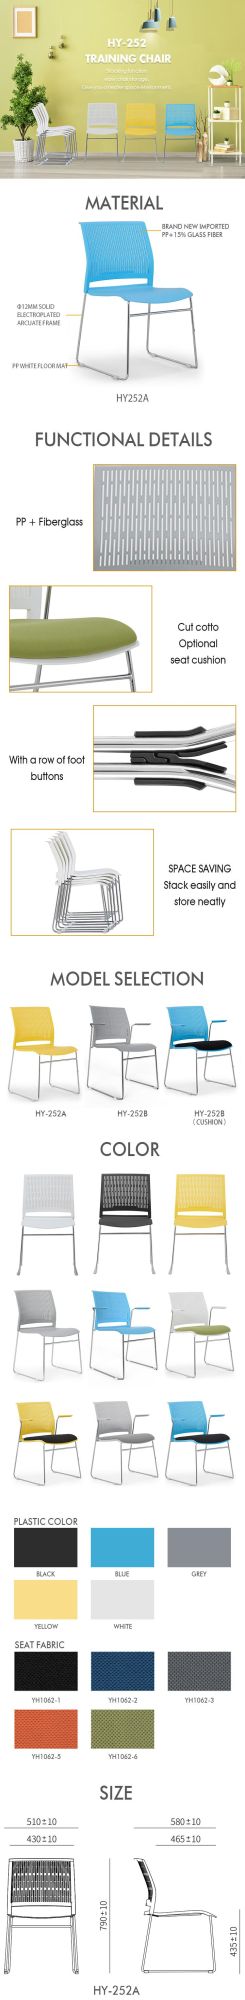 5 Year Warranty Training Room Conference Metal Frame Plastic Chair in Low Price